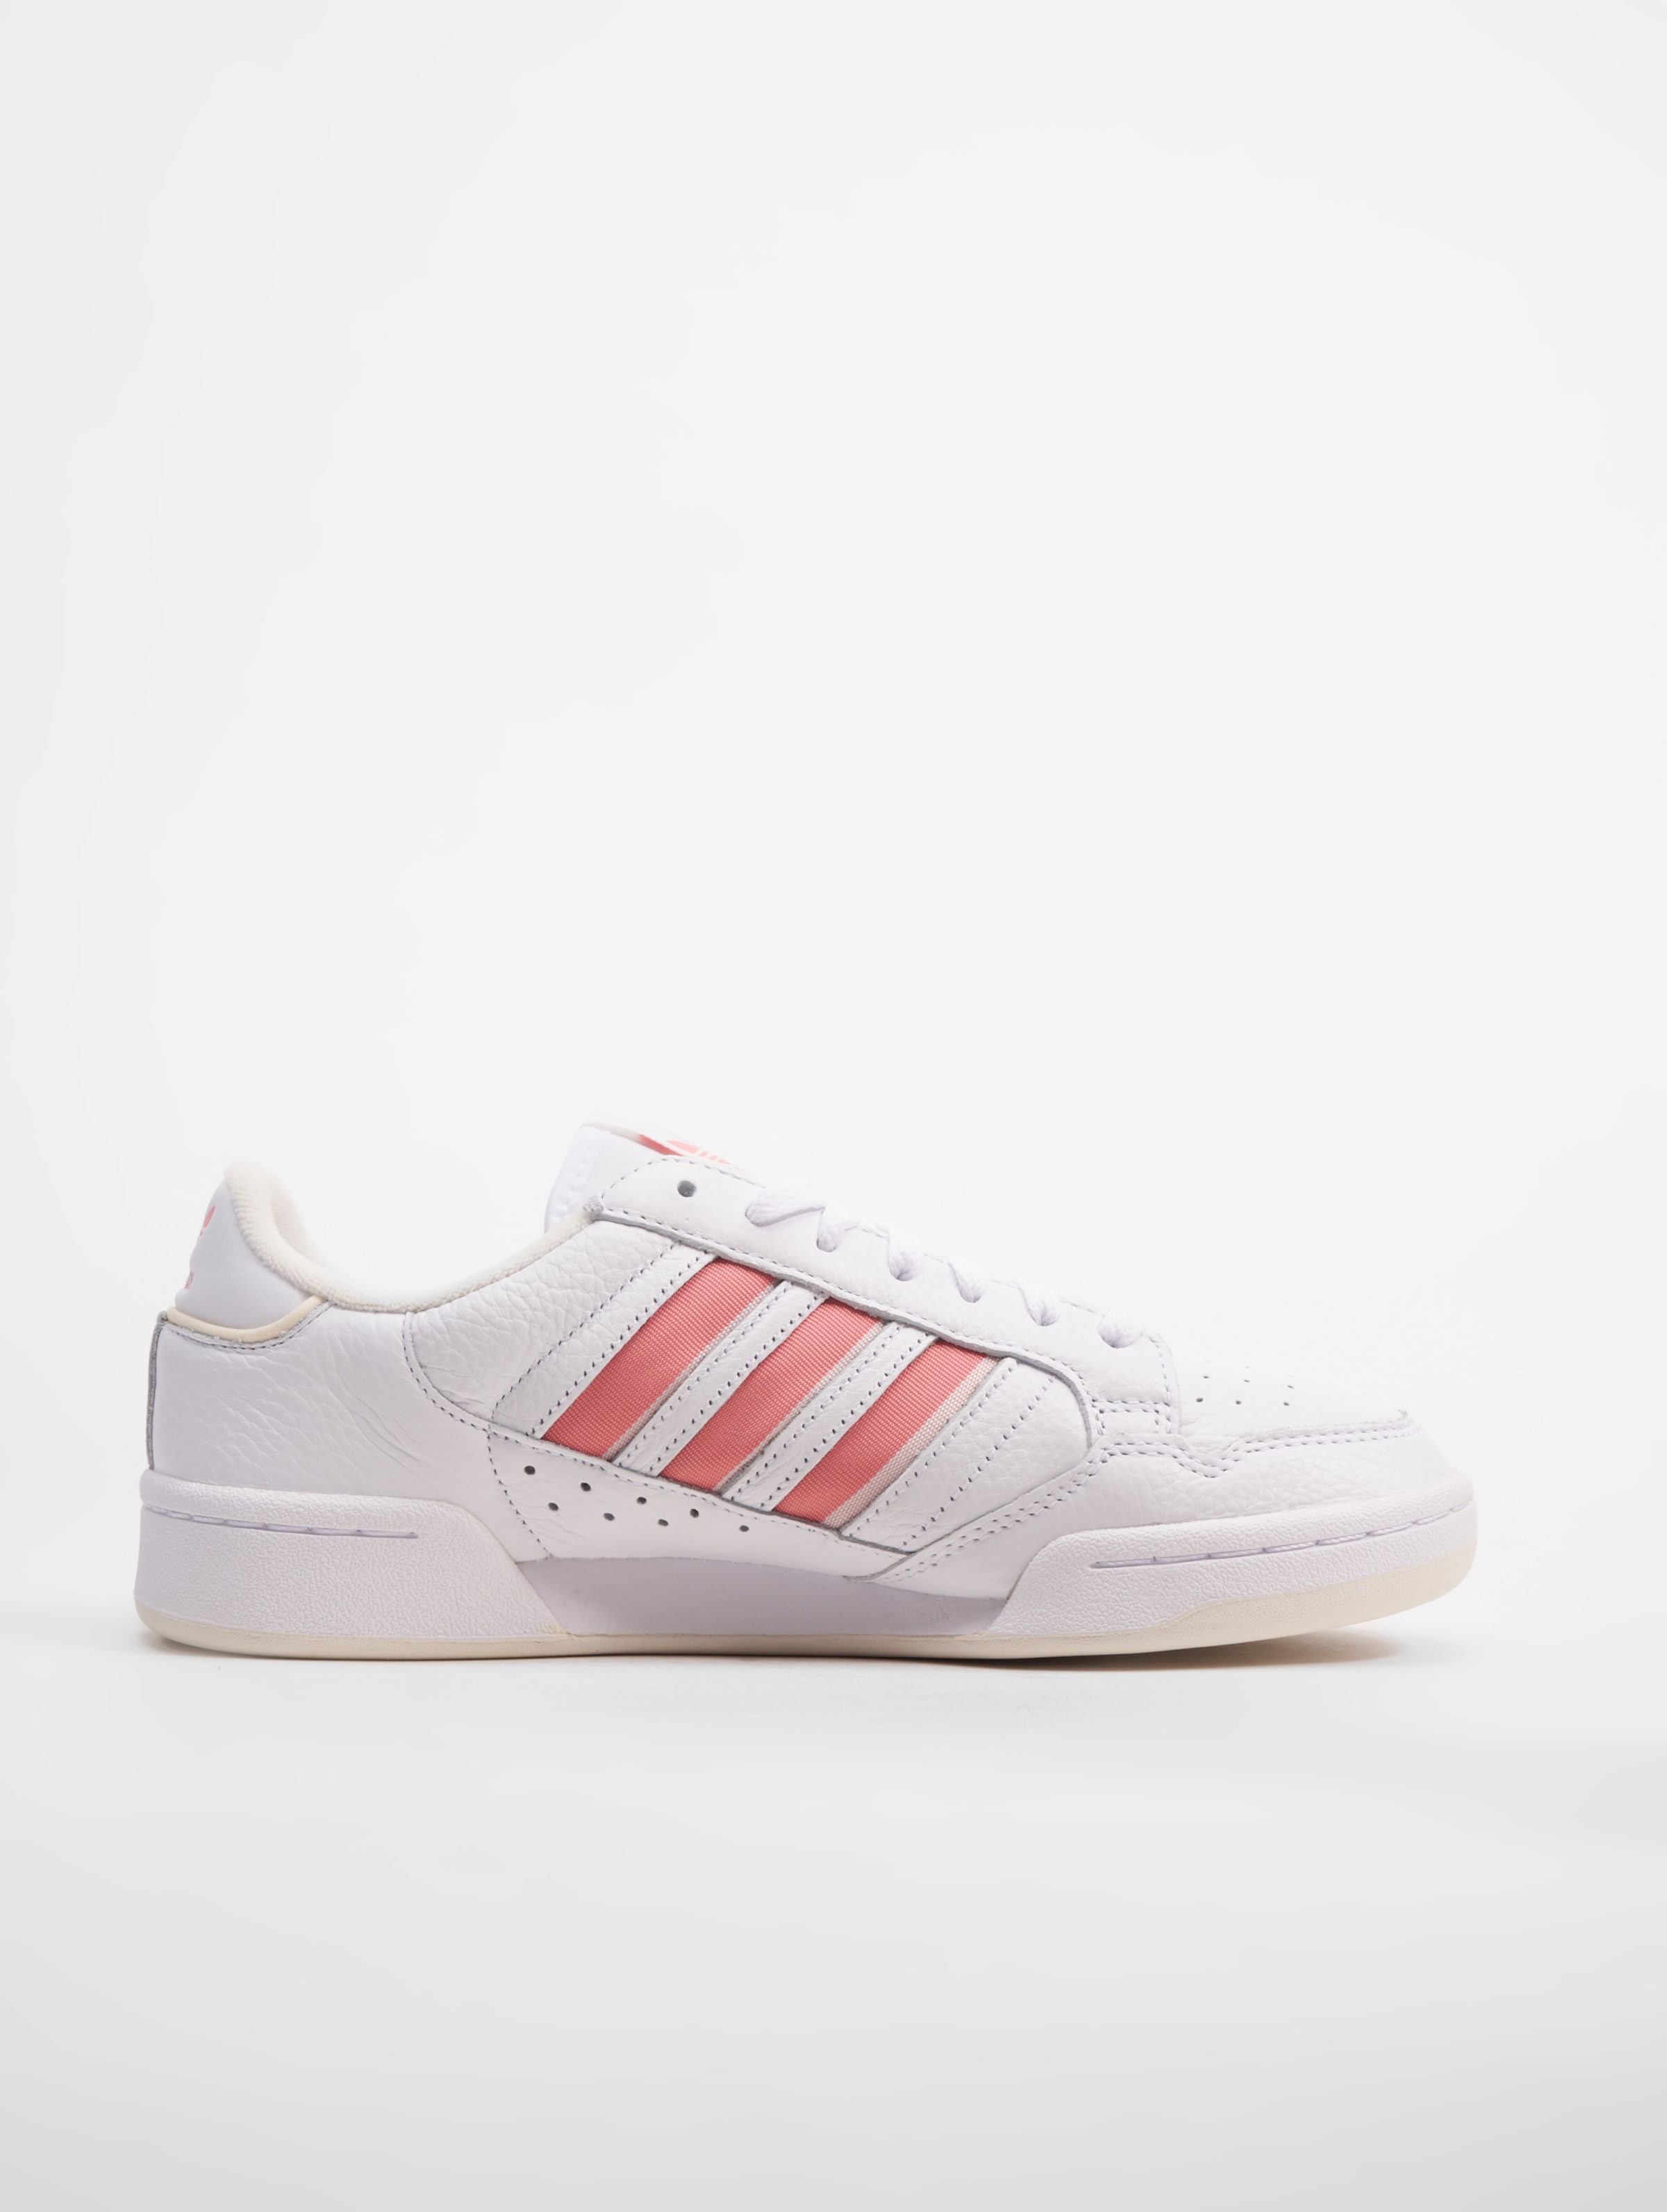 adidas continental 80 stripes shoes